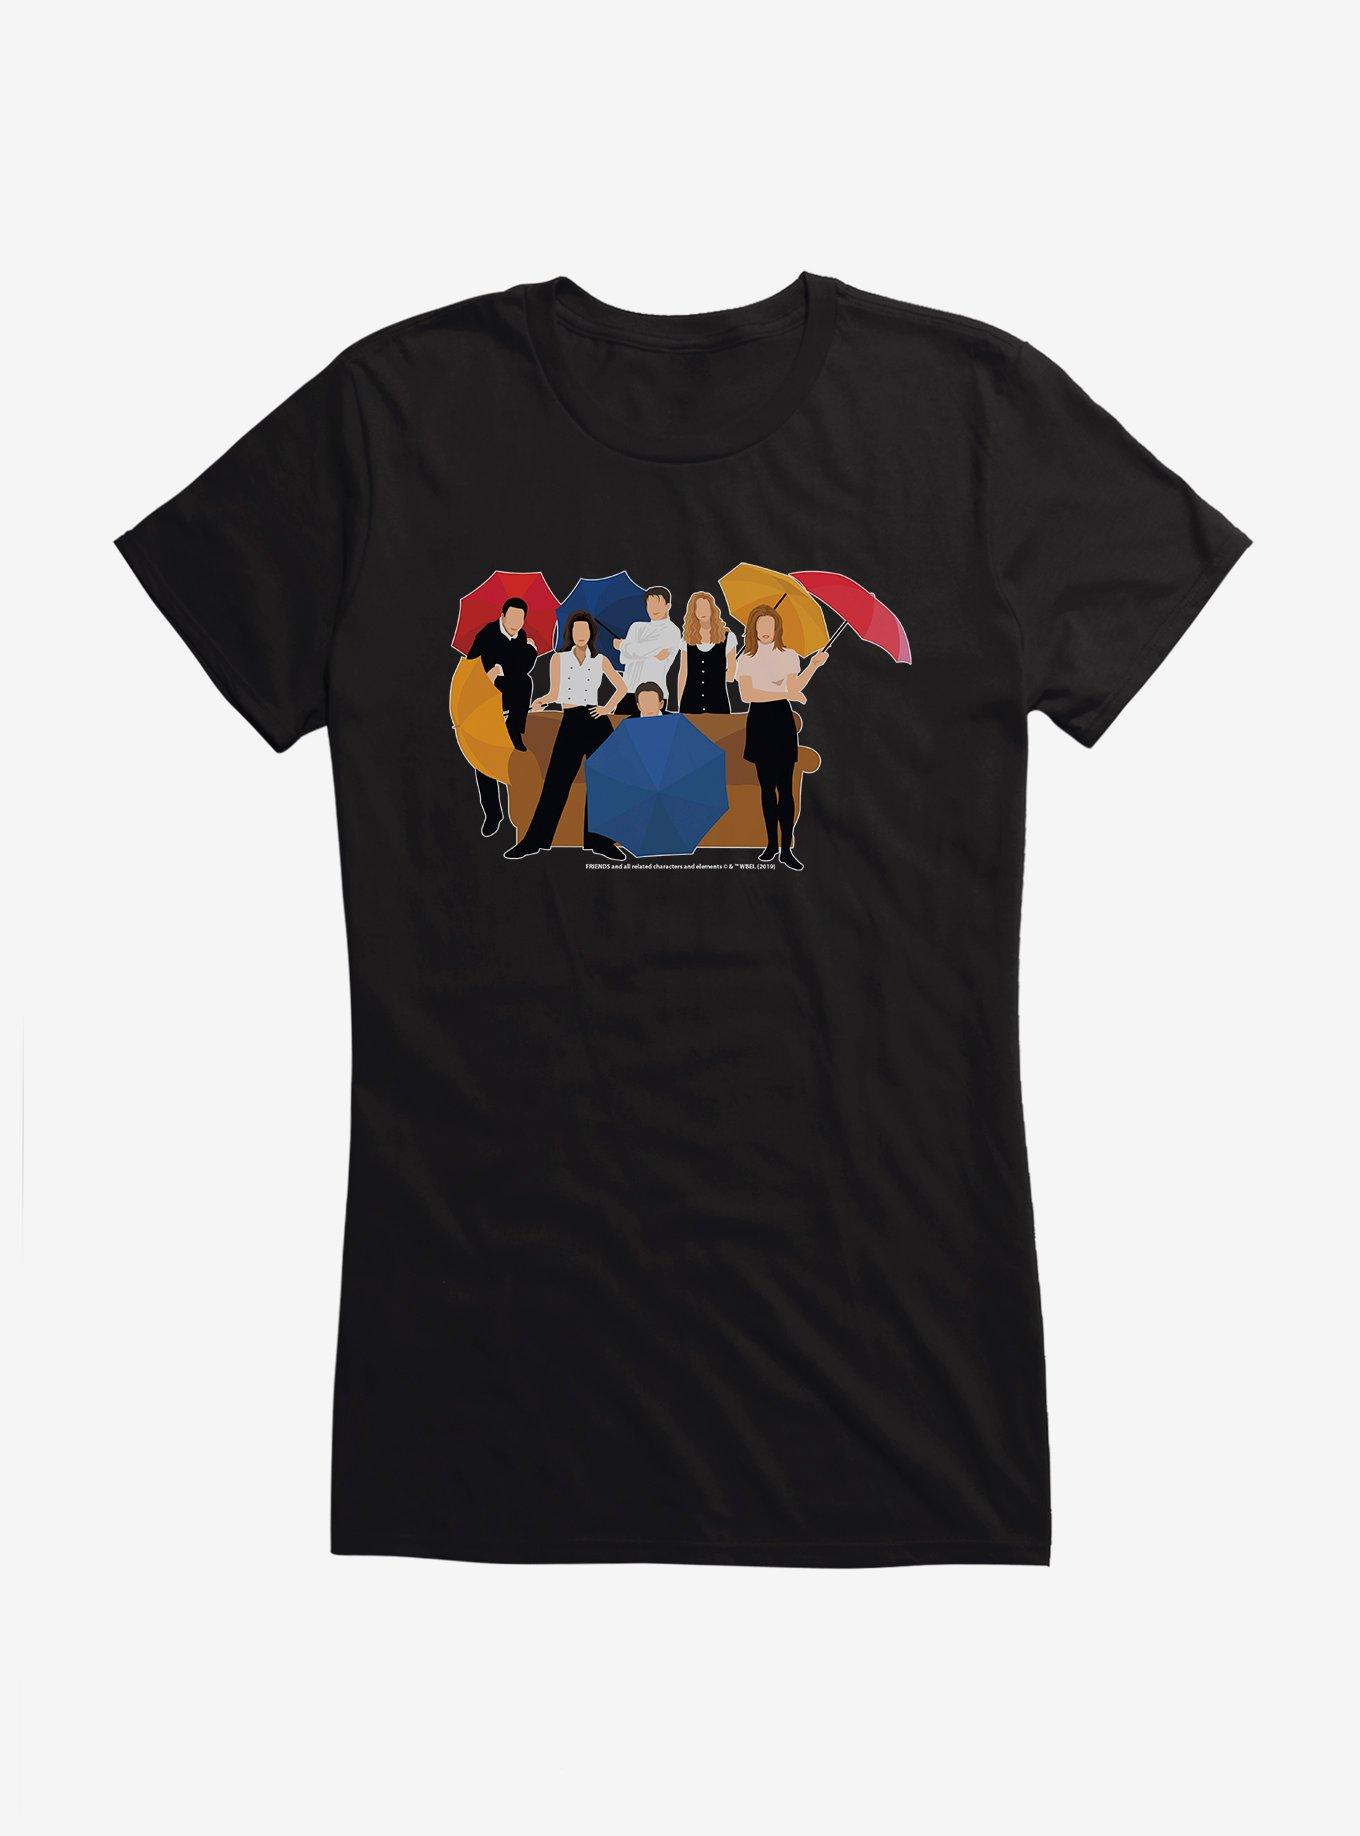 Friends Character Silhouettes Girls T-Shirt, BLACK, hi-res